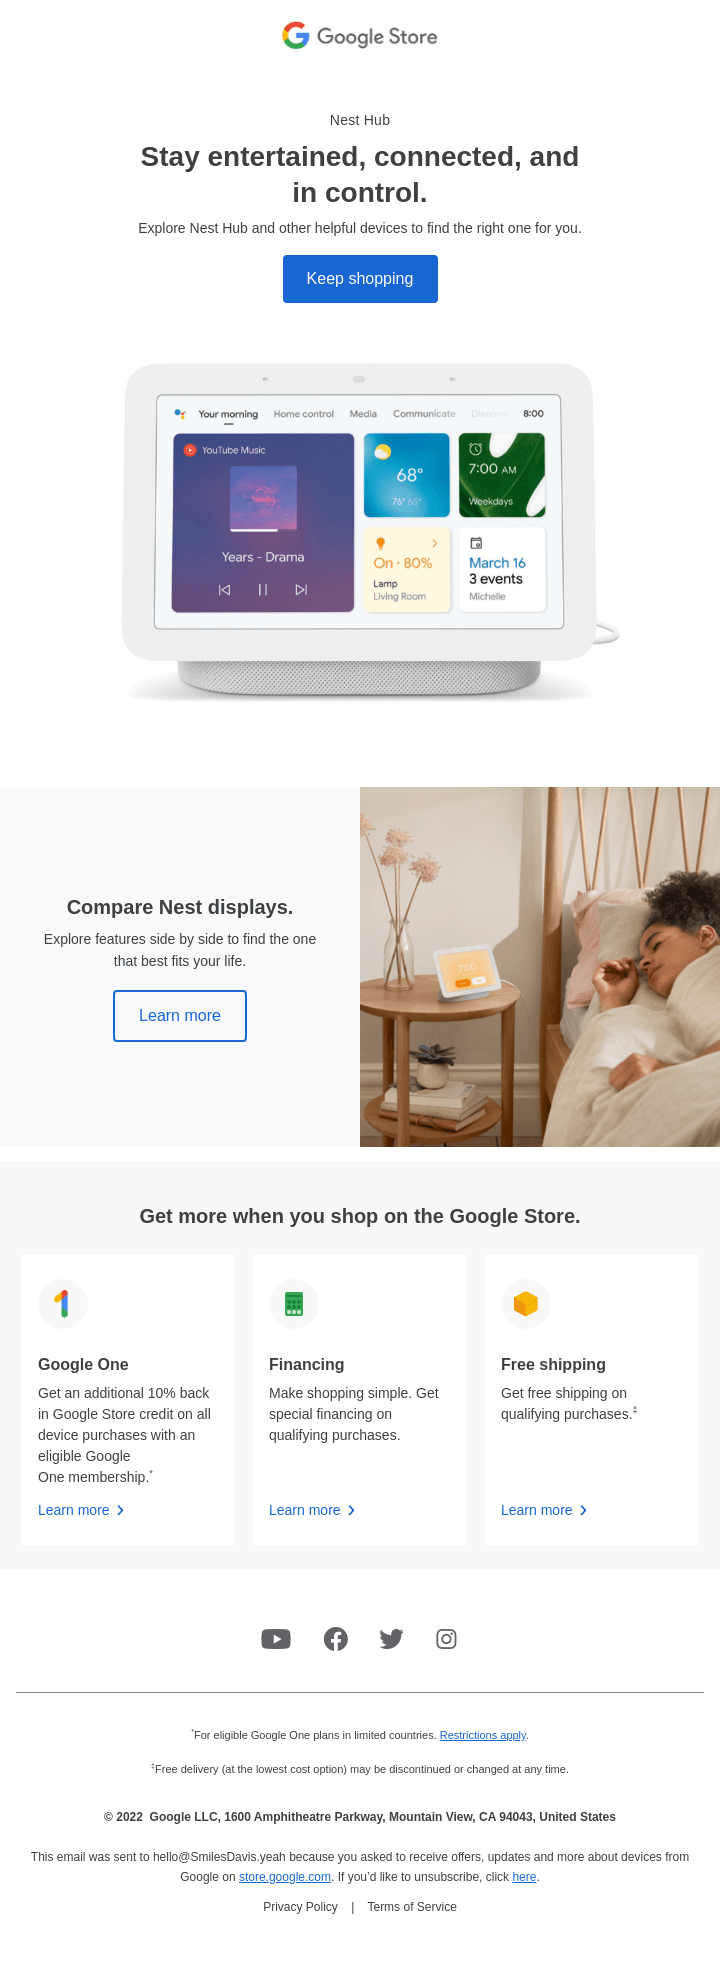 Smiles Davis, Nest Hub might be just what you're looking for